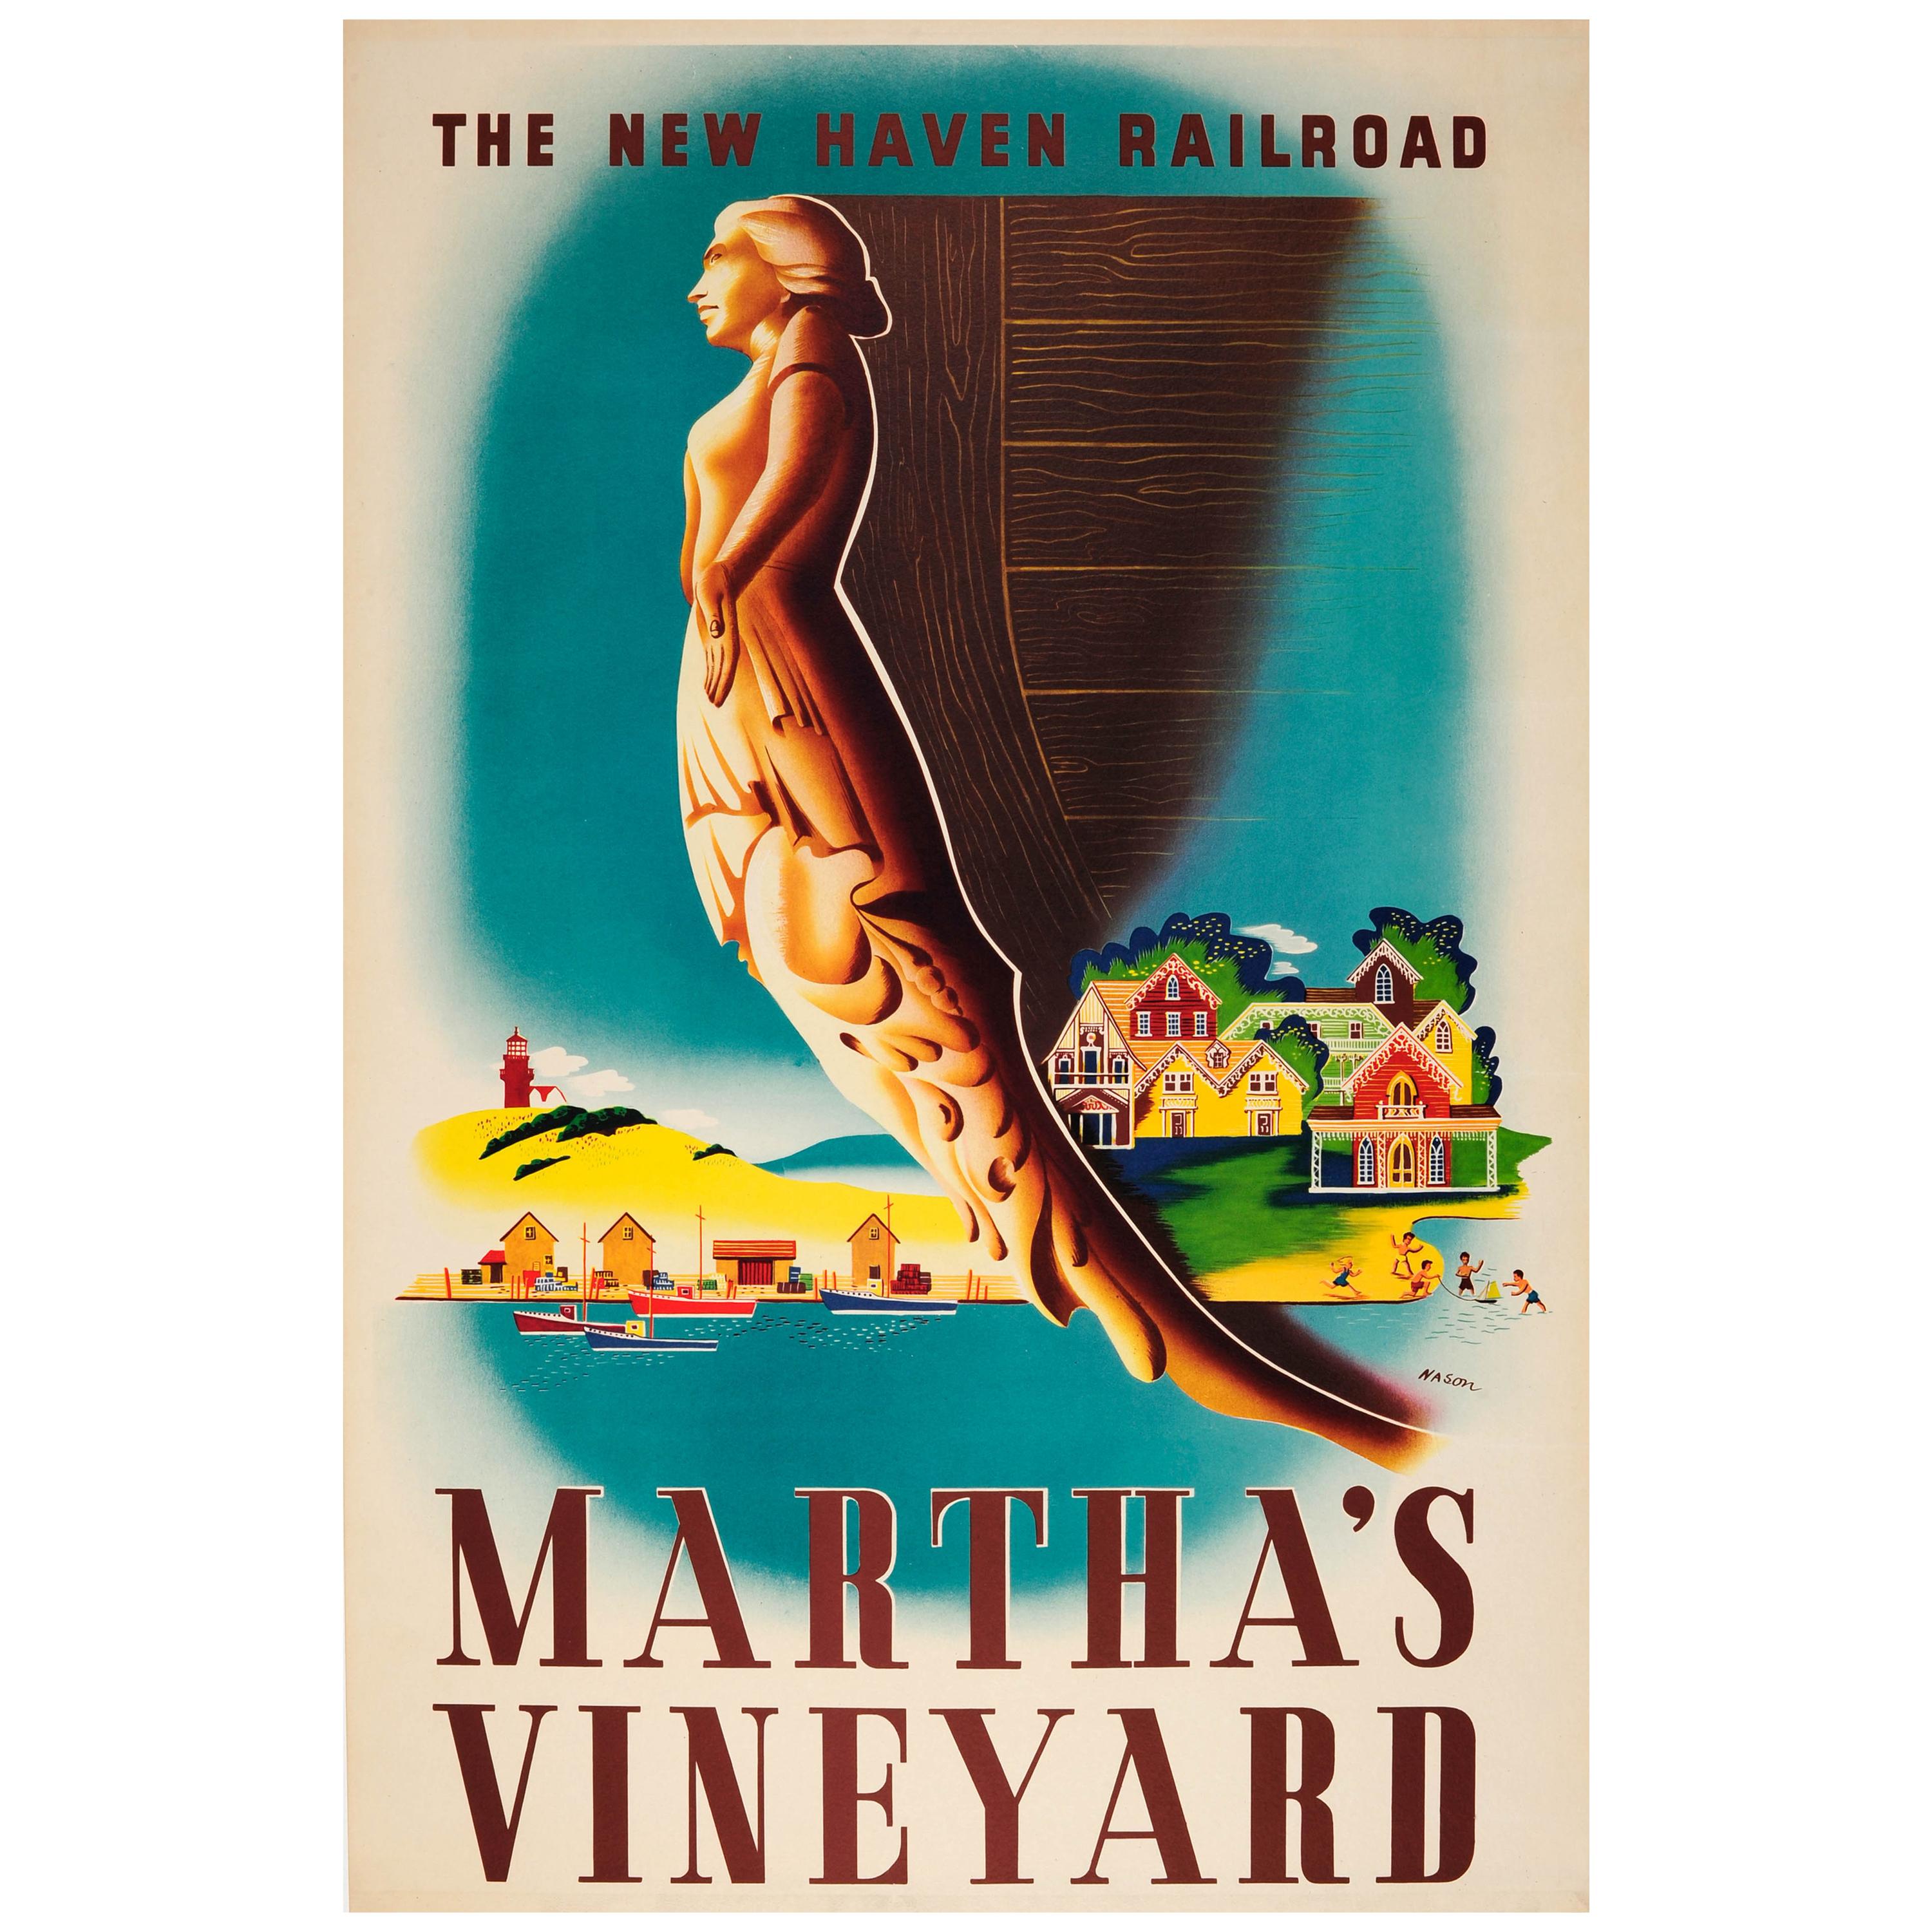 Original Vintage Travel Poster For Martha's Vineyard By The New Haven Railroad For Sale